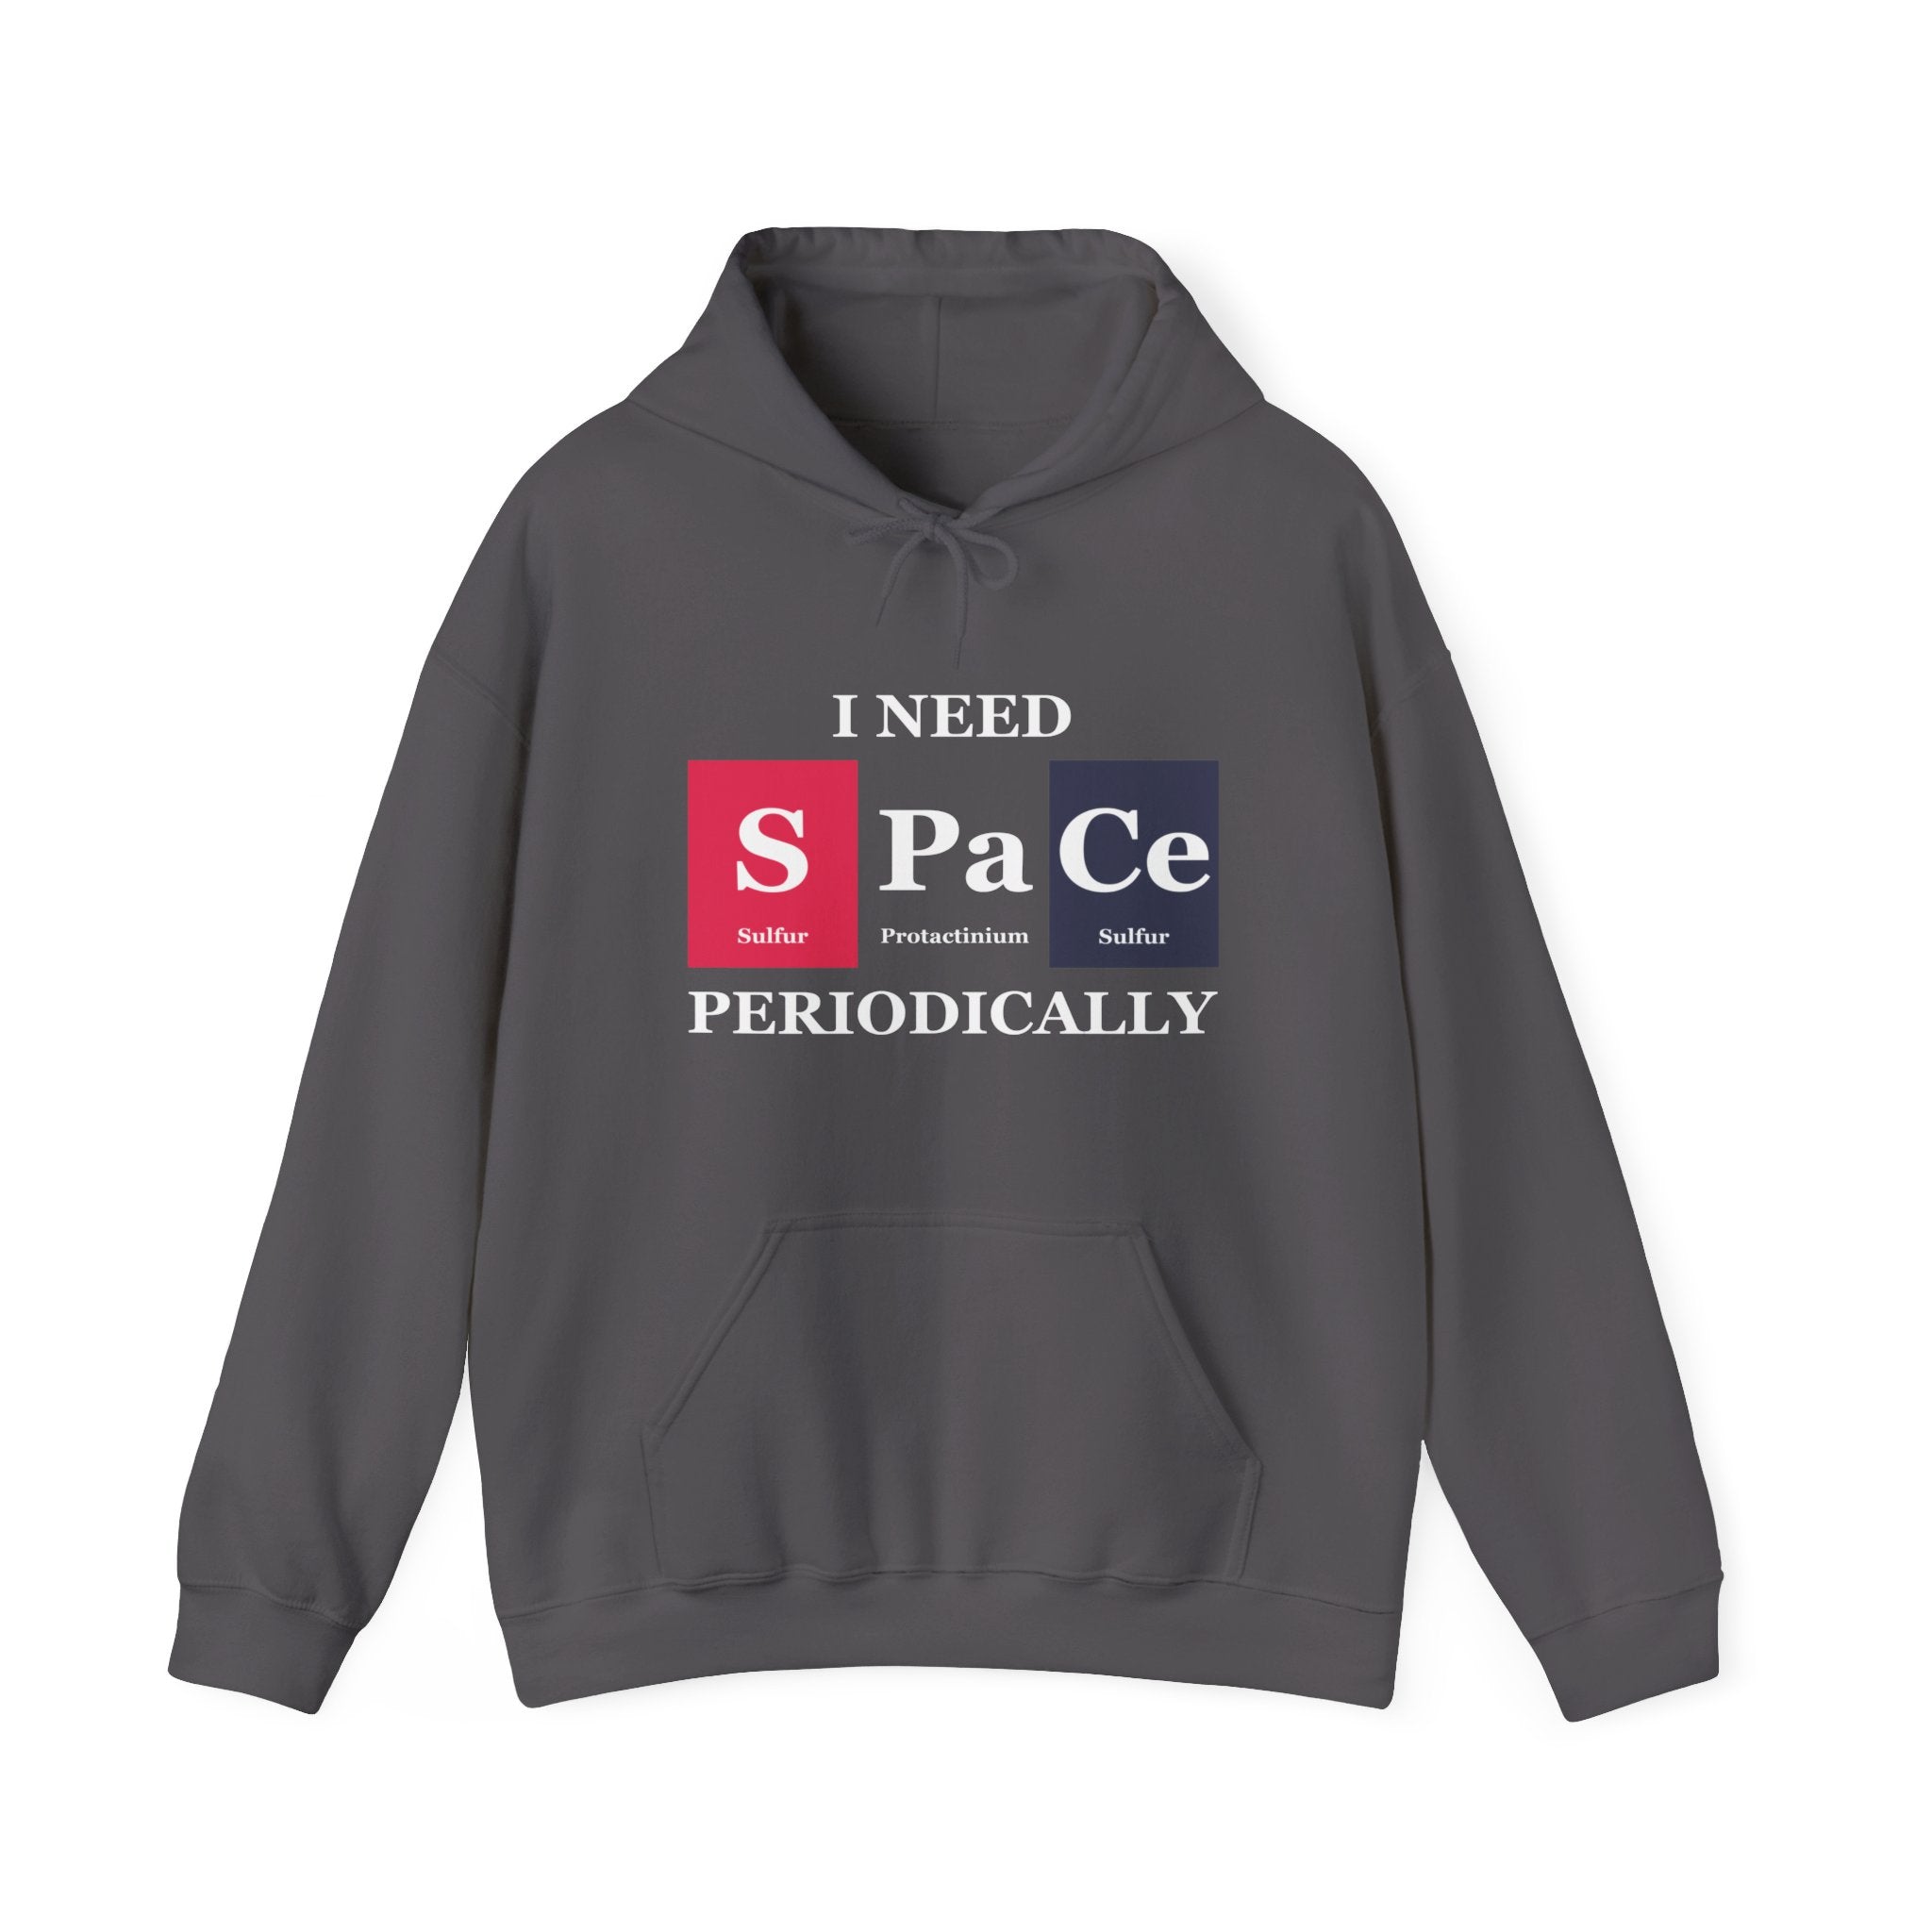 A dark gray hooded sweatshirt with the phrase "I NEED SPACE PERIODICALLY" written in white. The word "SPACE" is uniquely illustrated with periodic table elements: Sulfur (S), Protactinium (Pa), Cerium (Ce). This vibrant design brings a scientific twist to your casual wear. Introducing the S-Pa-Ce - Hooded Sweatshirt.